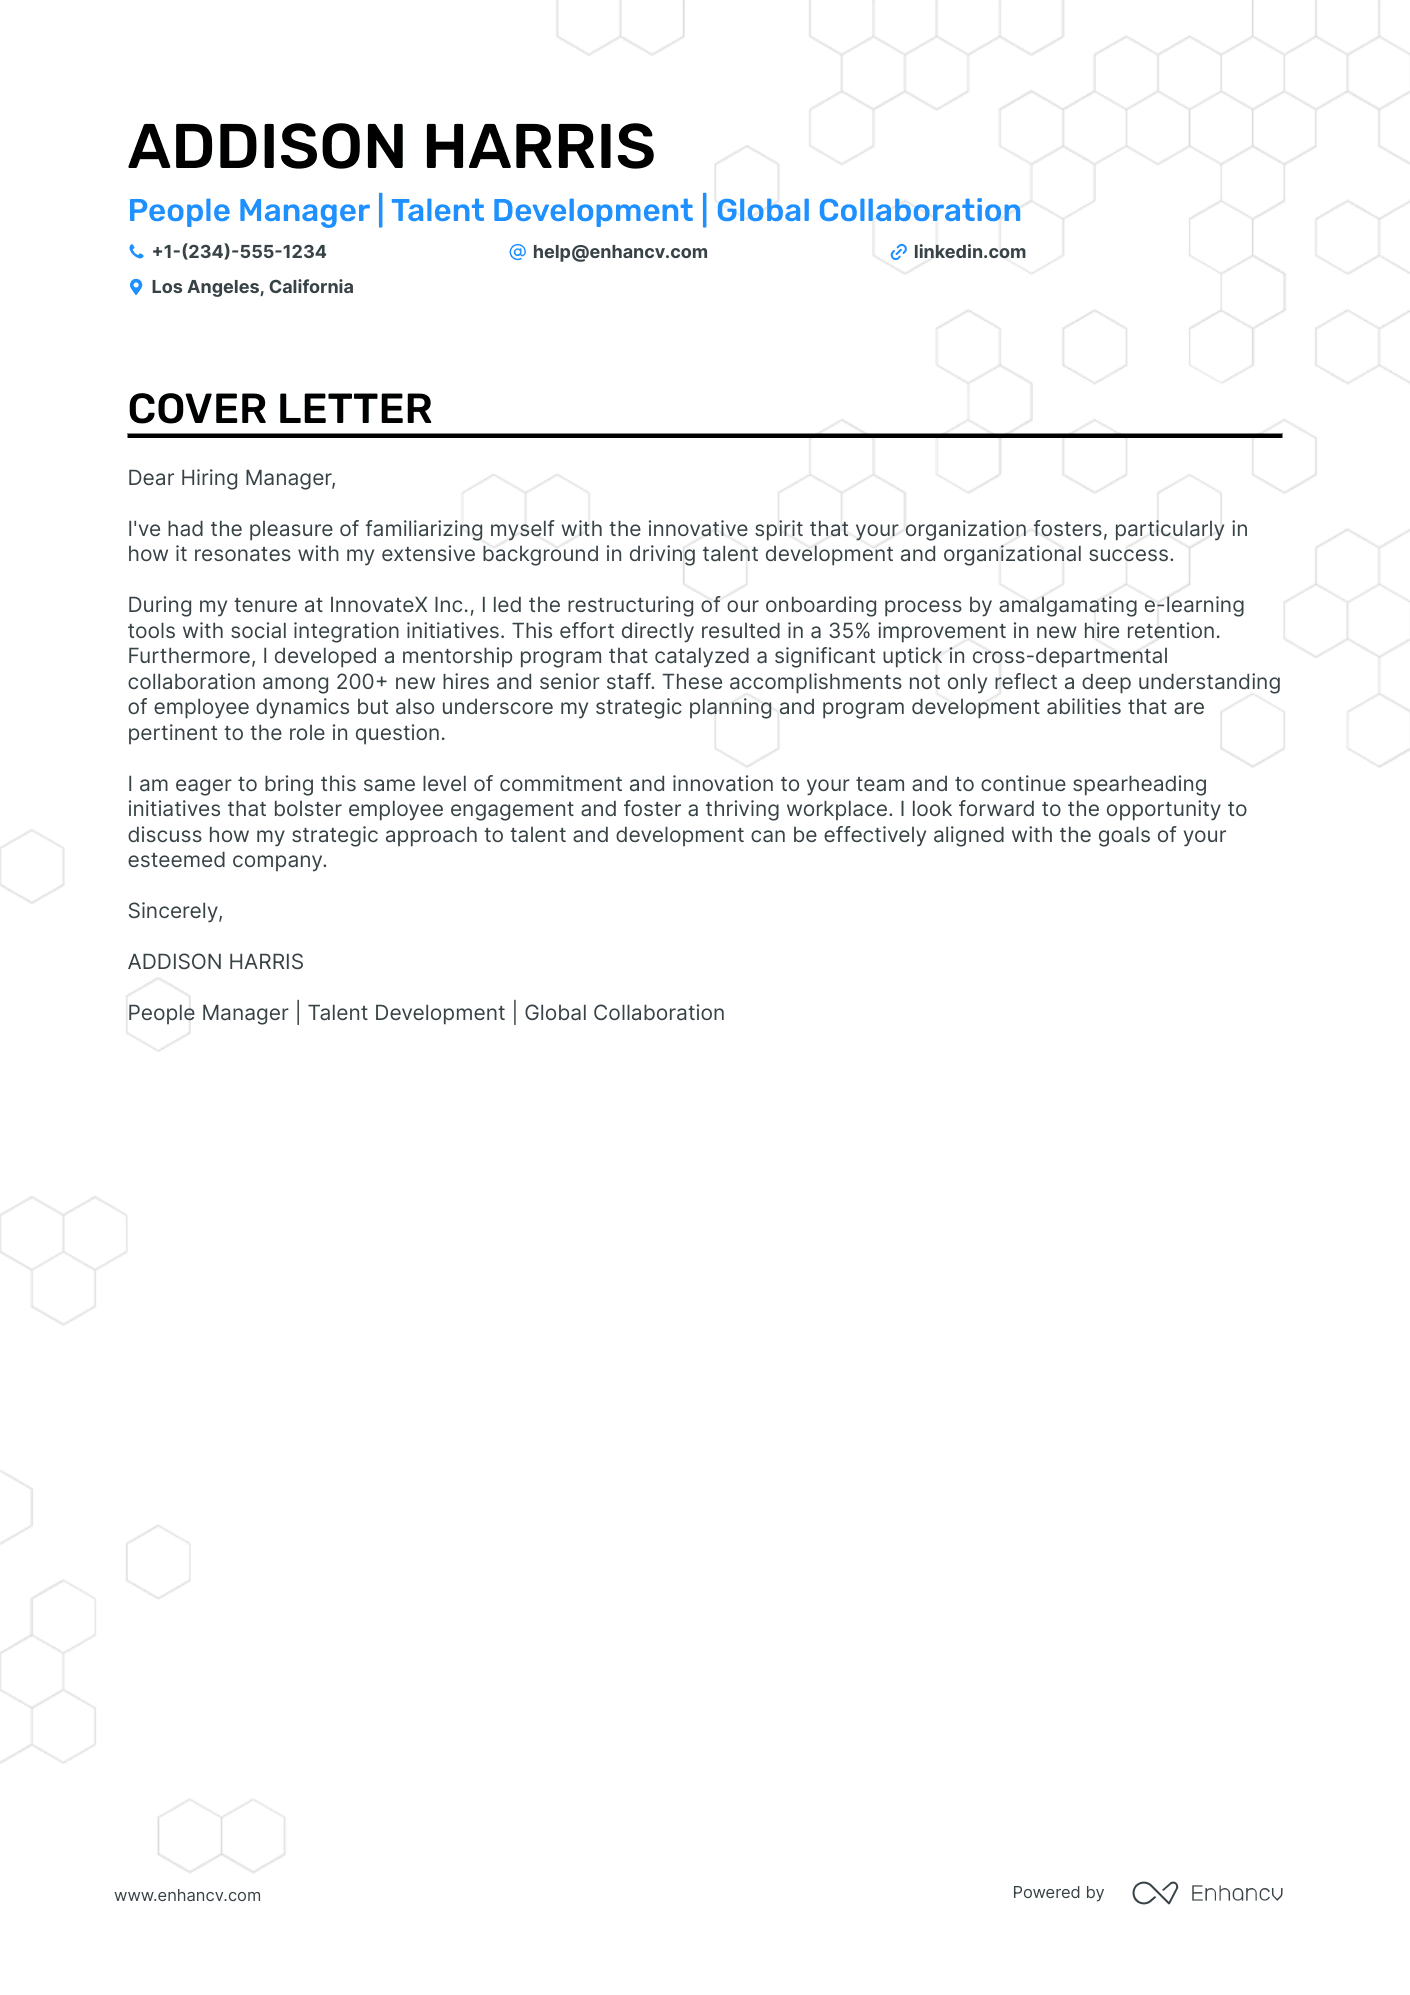 People Manager cover letter